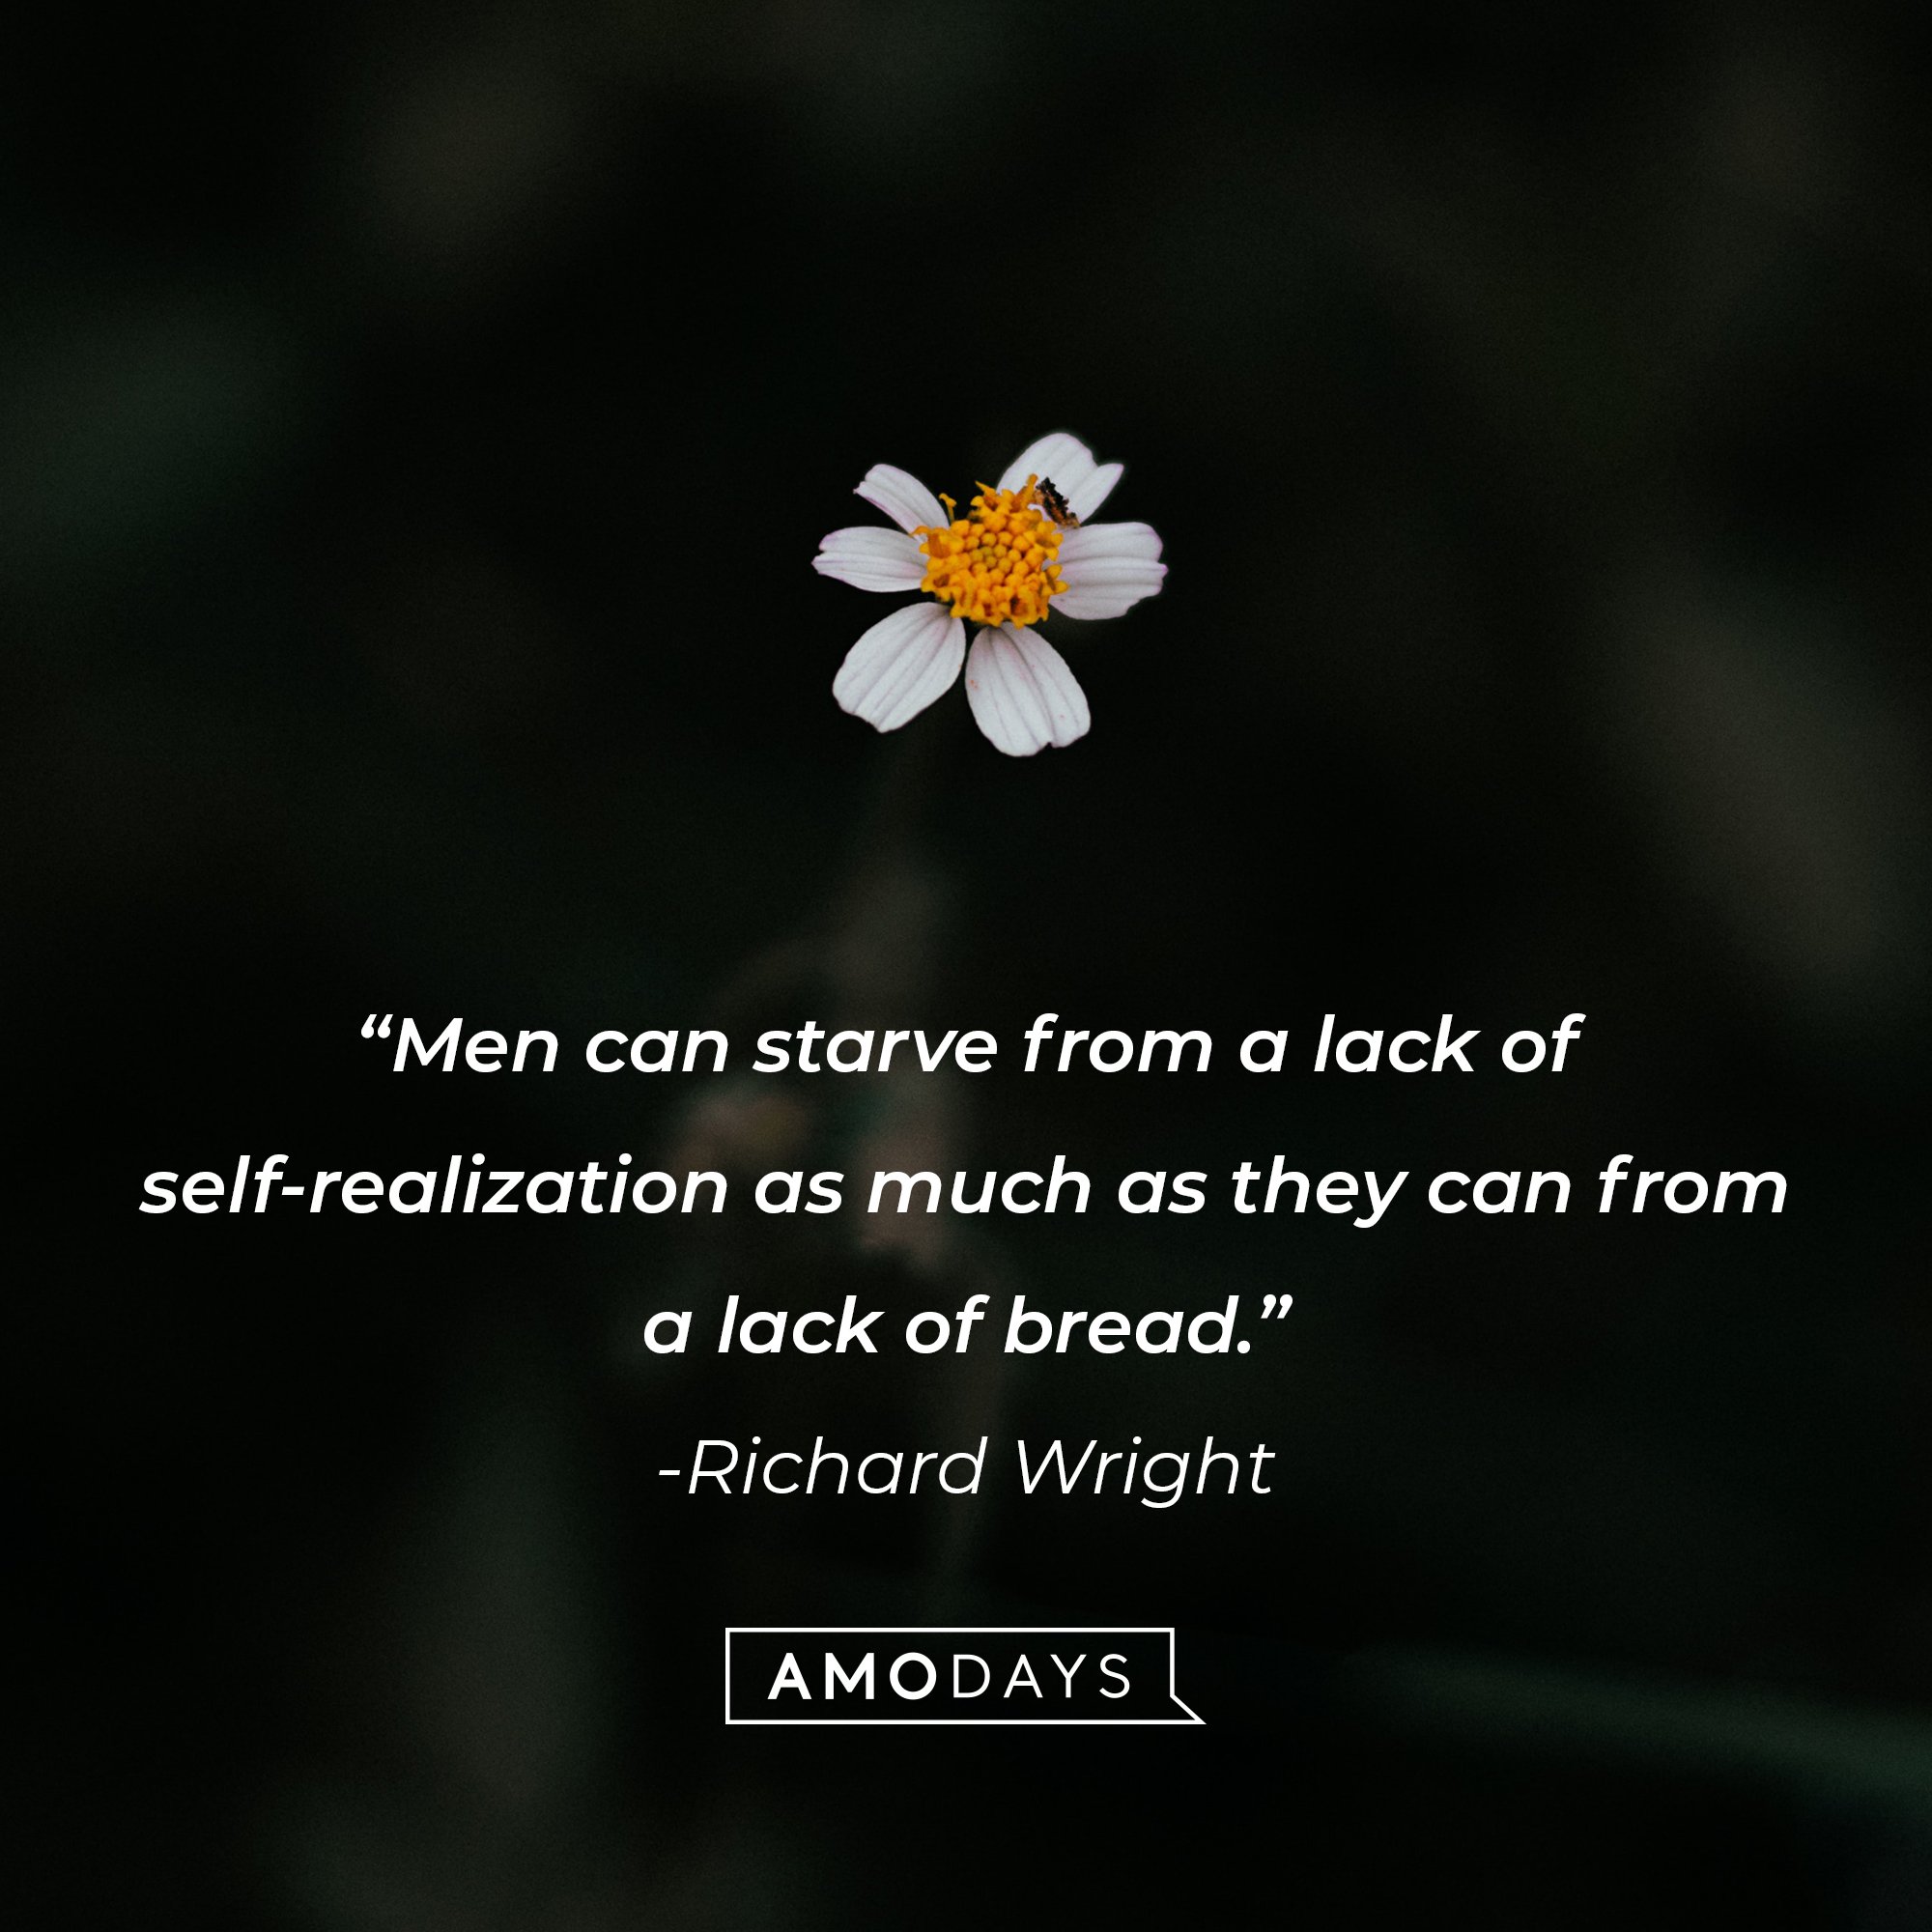  Richard Wright's quote: “Men can starve from a lack of self-realization as much as they can from a lack of bread.” | Image: AmoDays